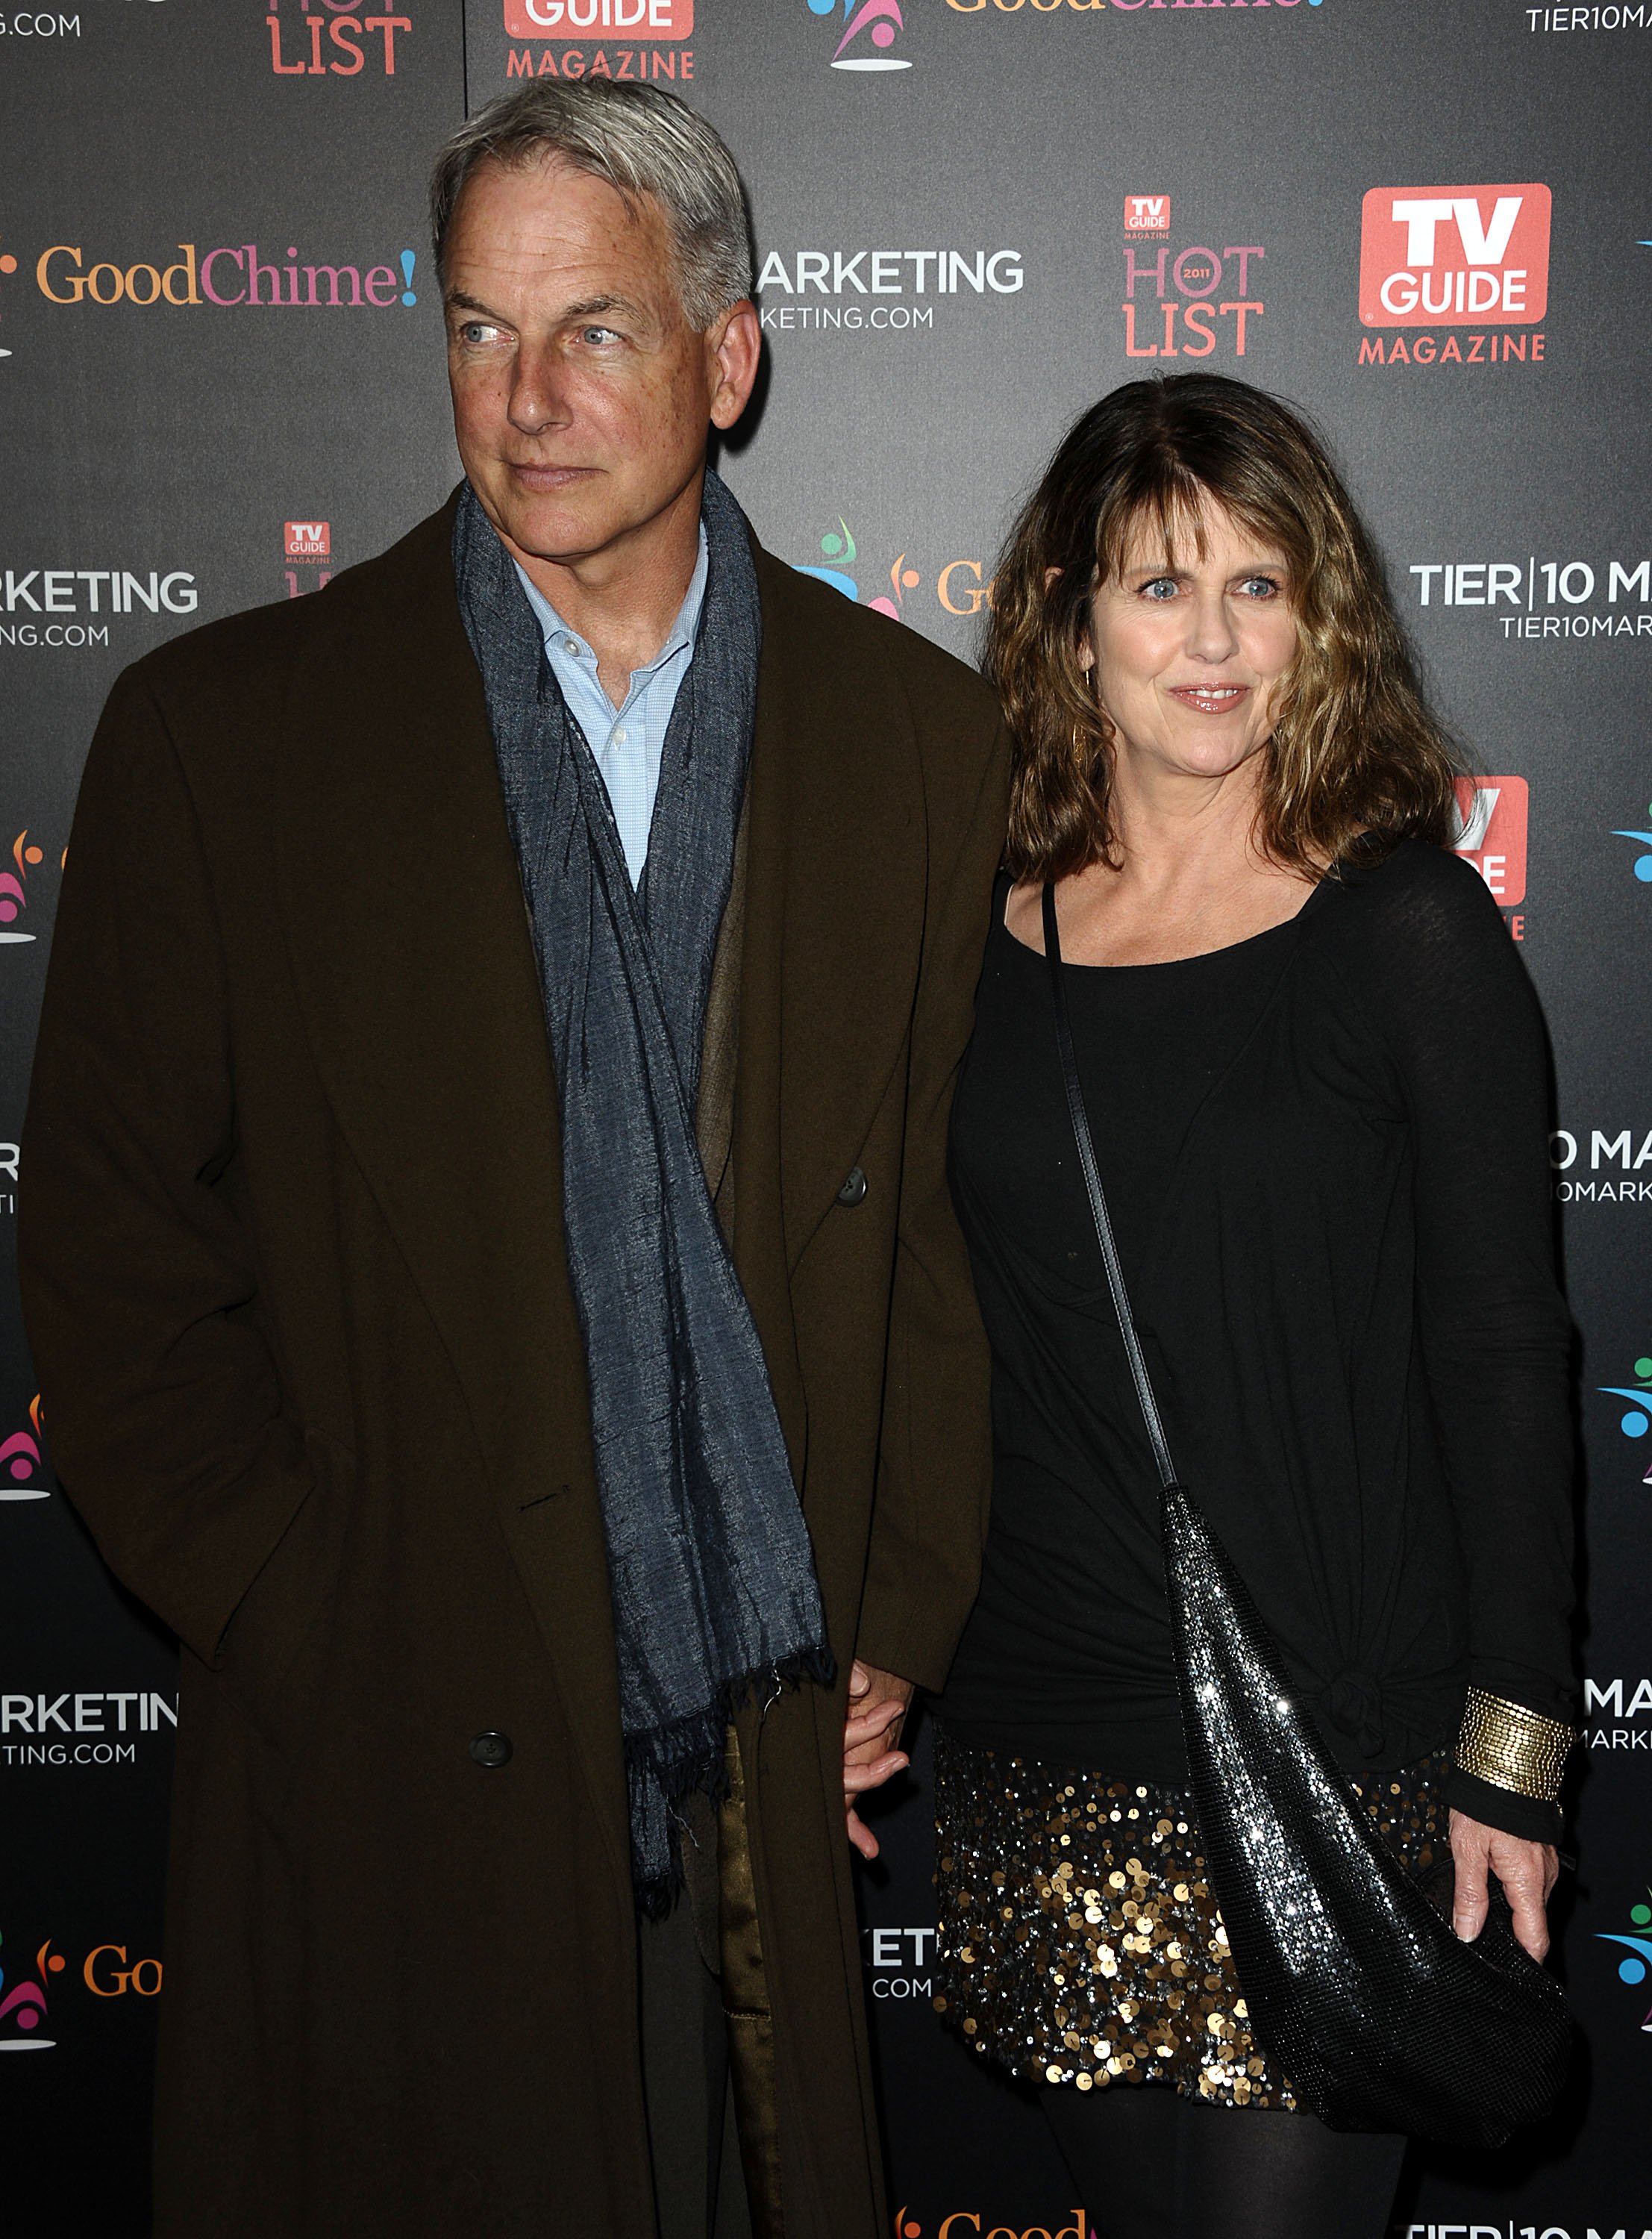 Mark Harmon and actress Pam Dawber attend the 2011 TV Guide Magazine Hot List Party at Greystone Manor Supperclub on November 7, 2011, in West Hollywood, California. | Source: Getty Images